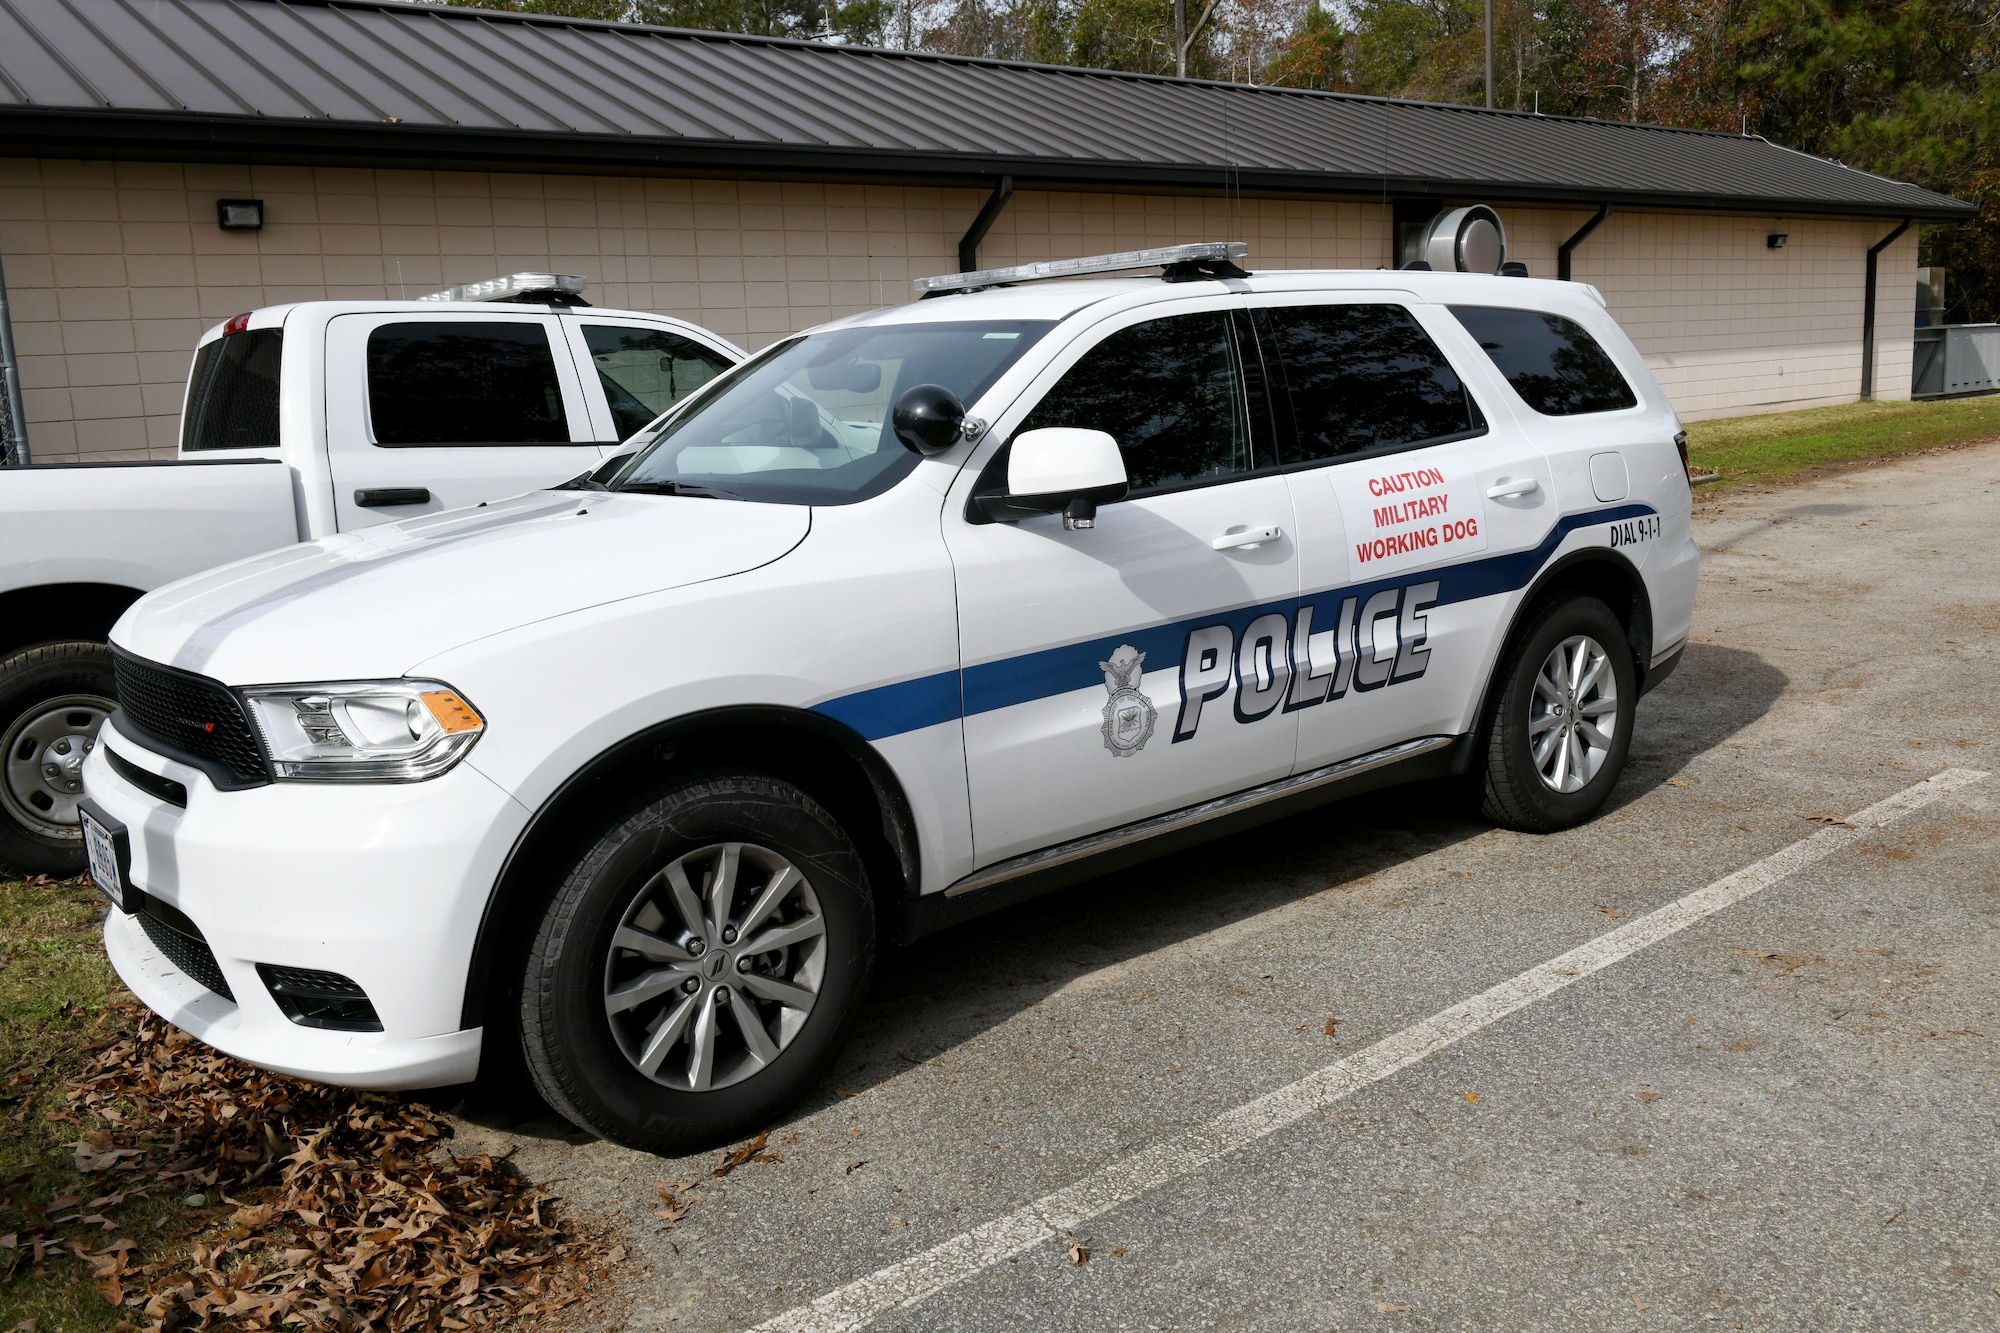 78th Security Forces Squadron receives new K-9 SUV’s